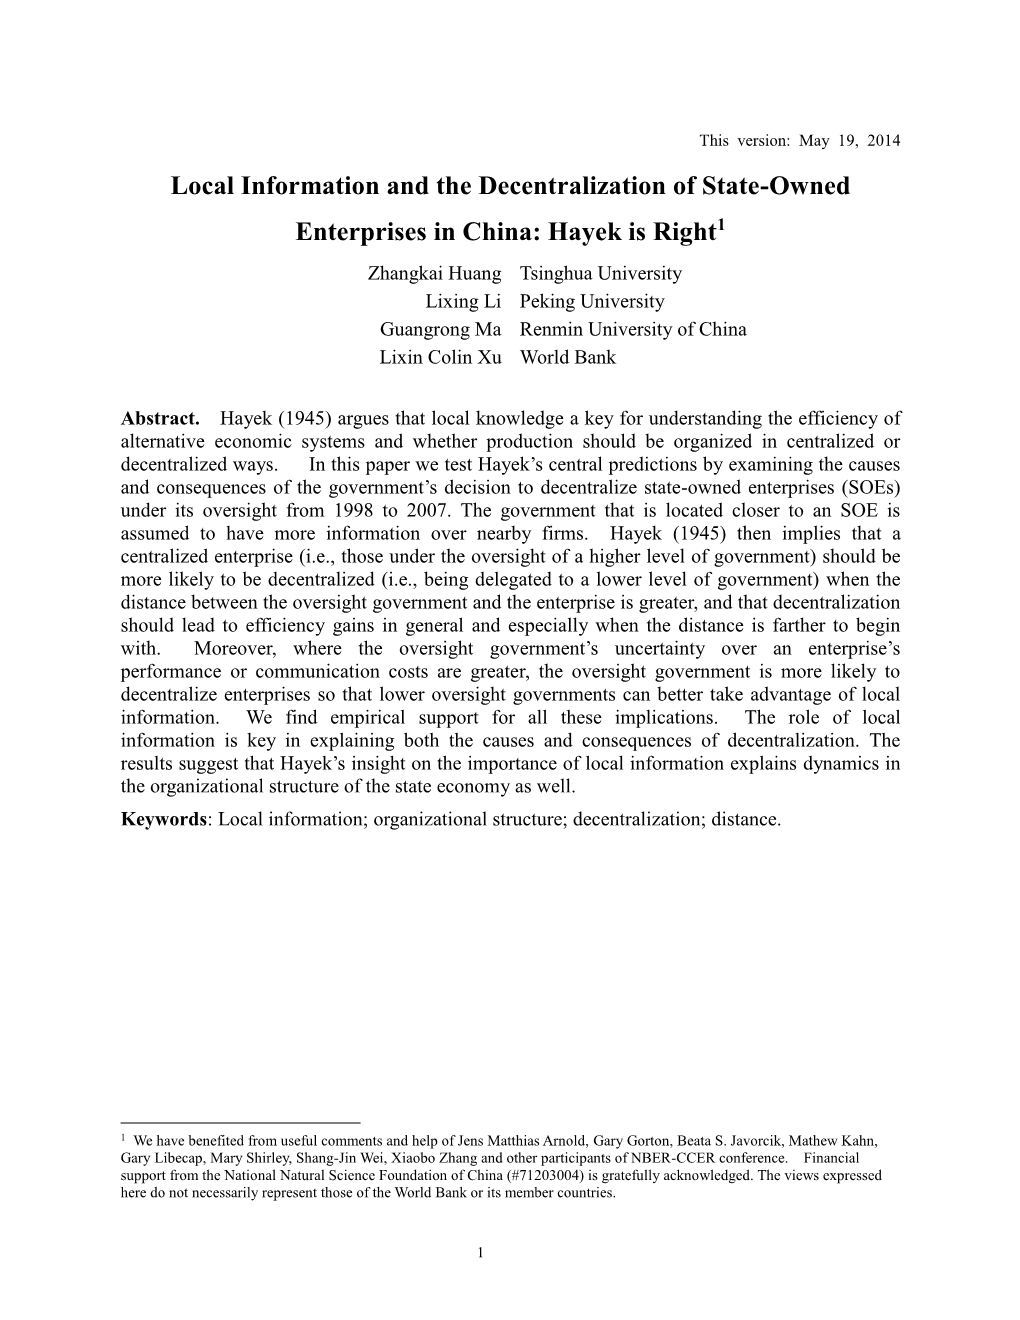 Local Information and the Decentralization of State-Owned